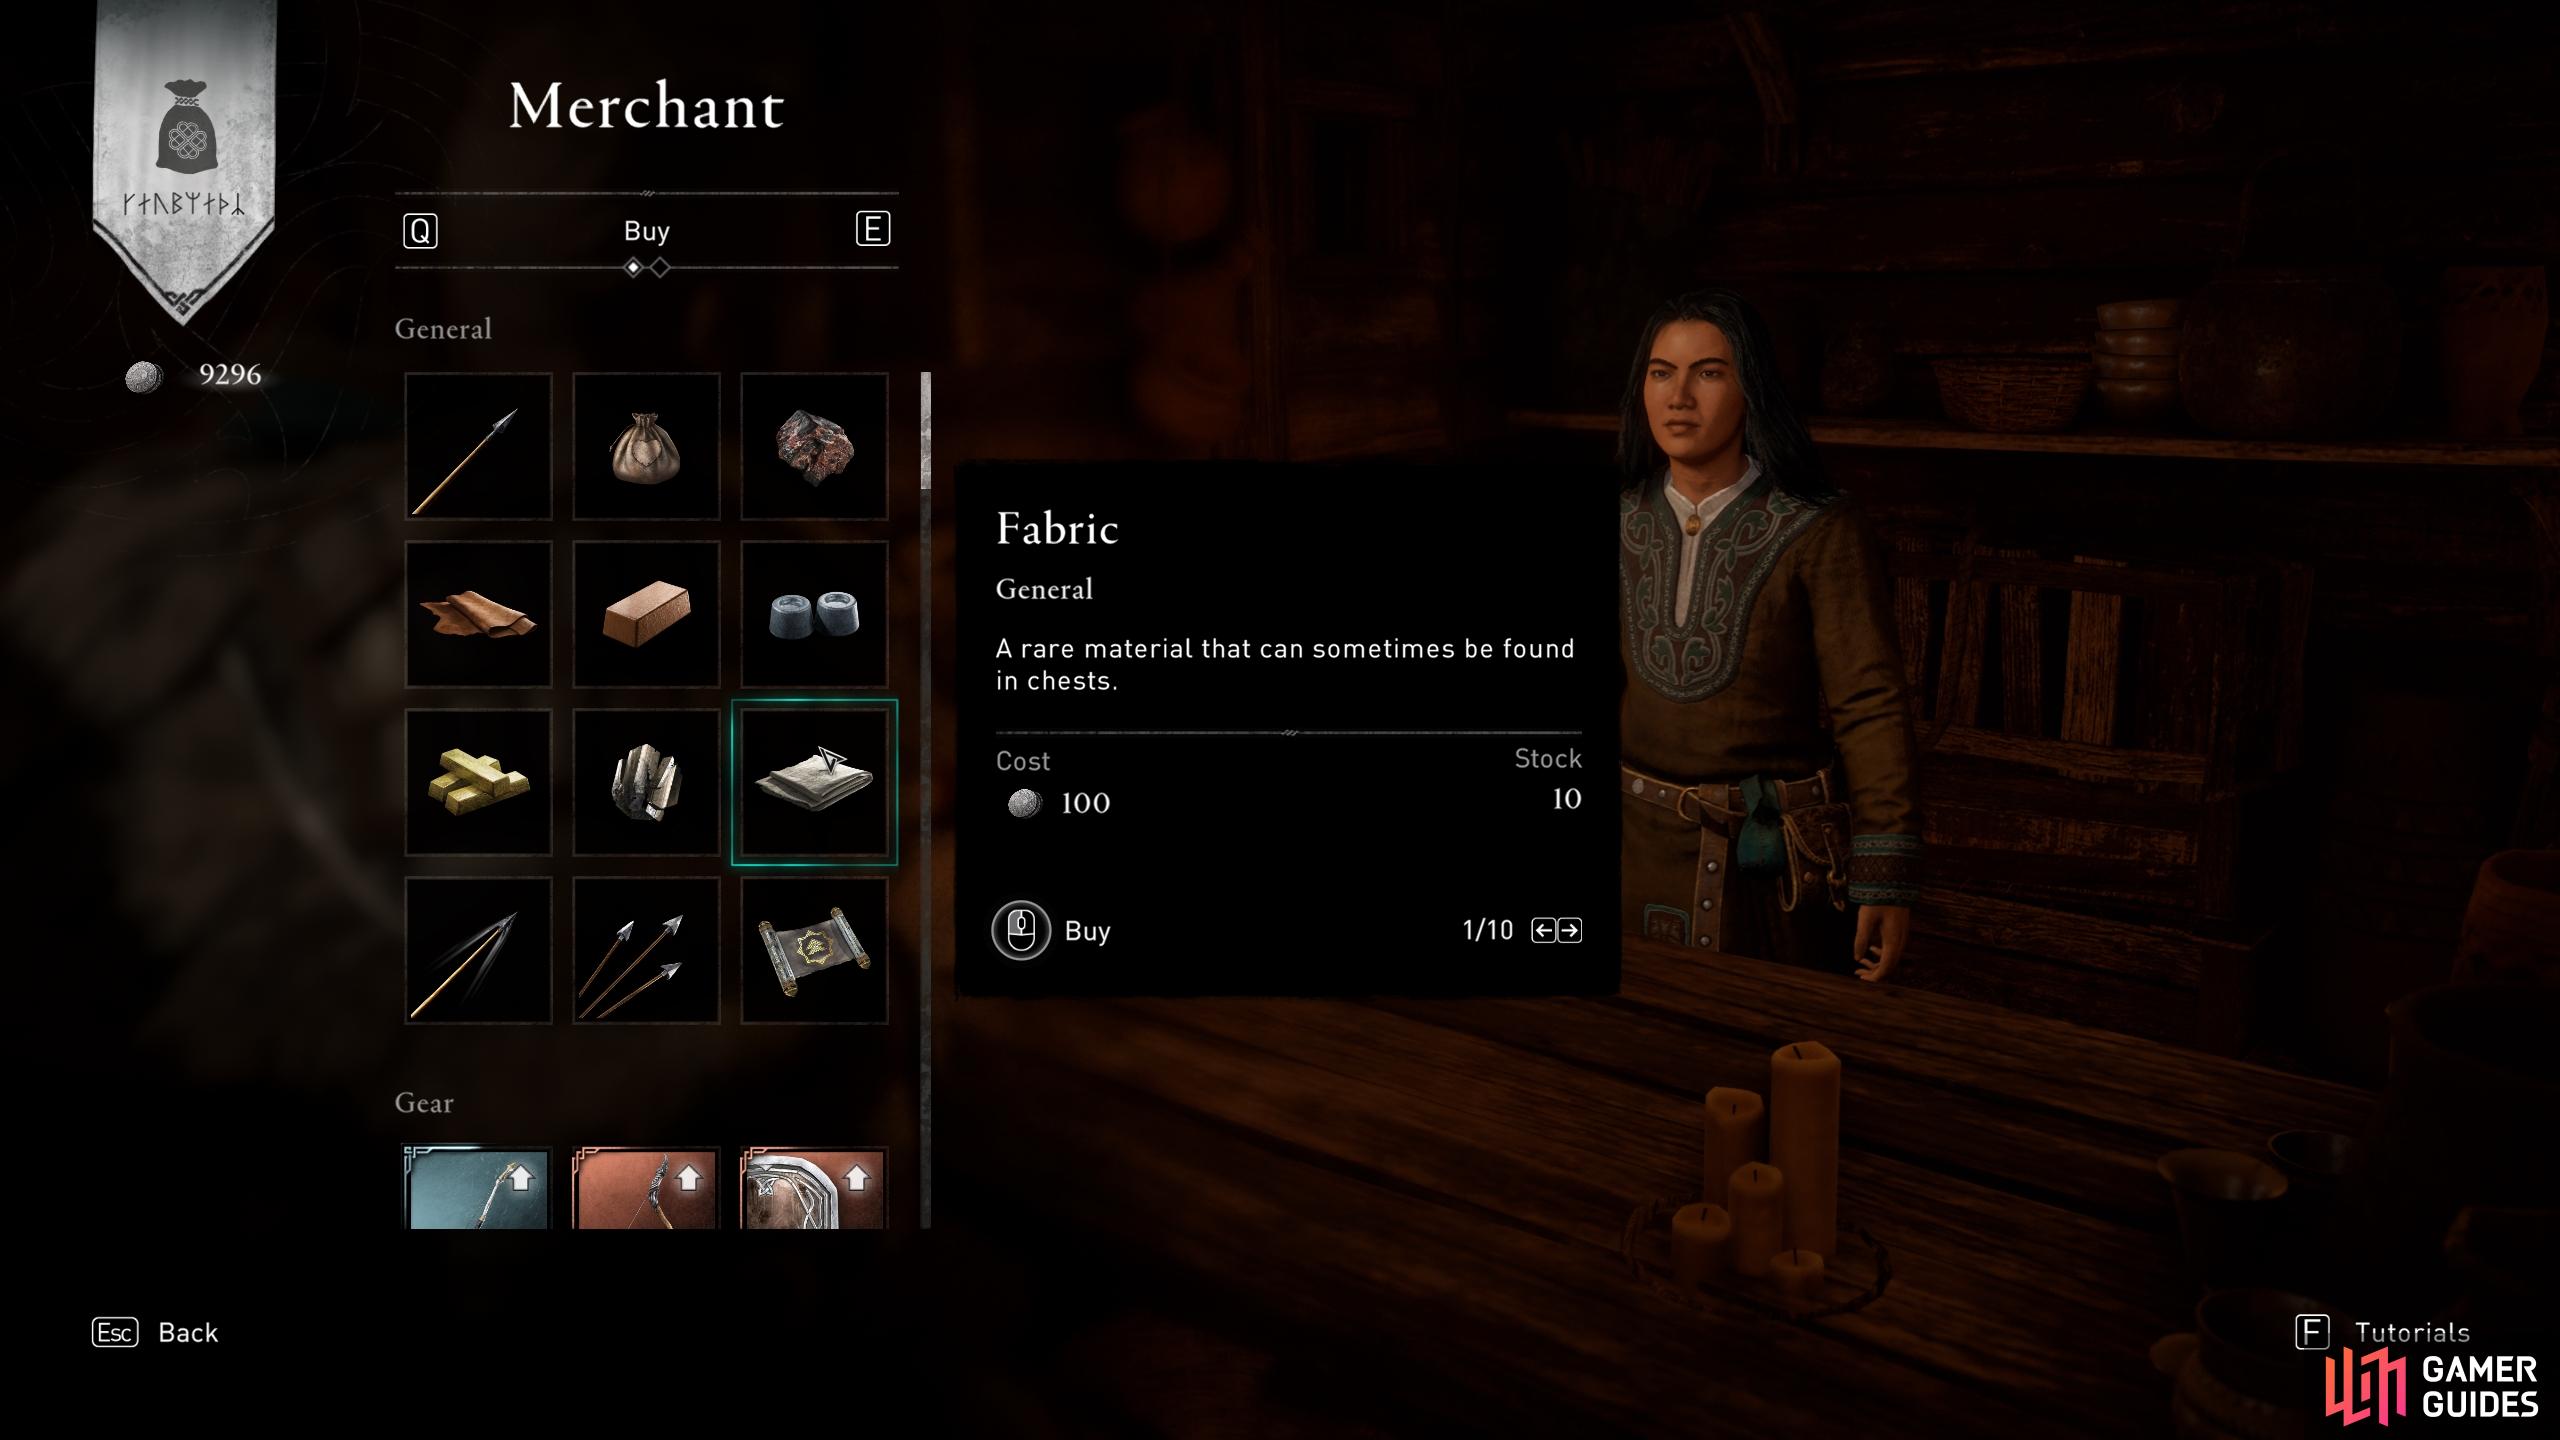 You can purchase fabric from any merchant for 100 silver per piece.